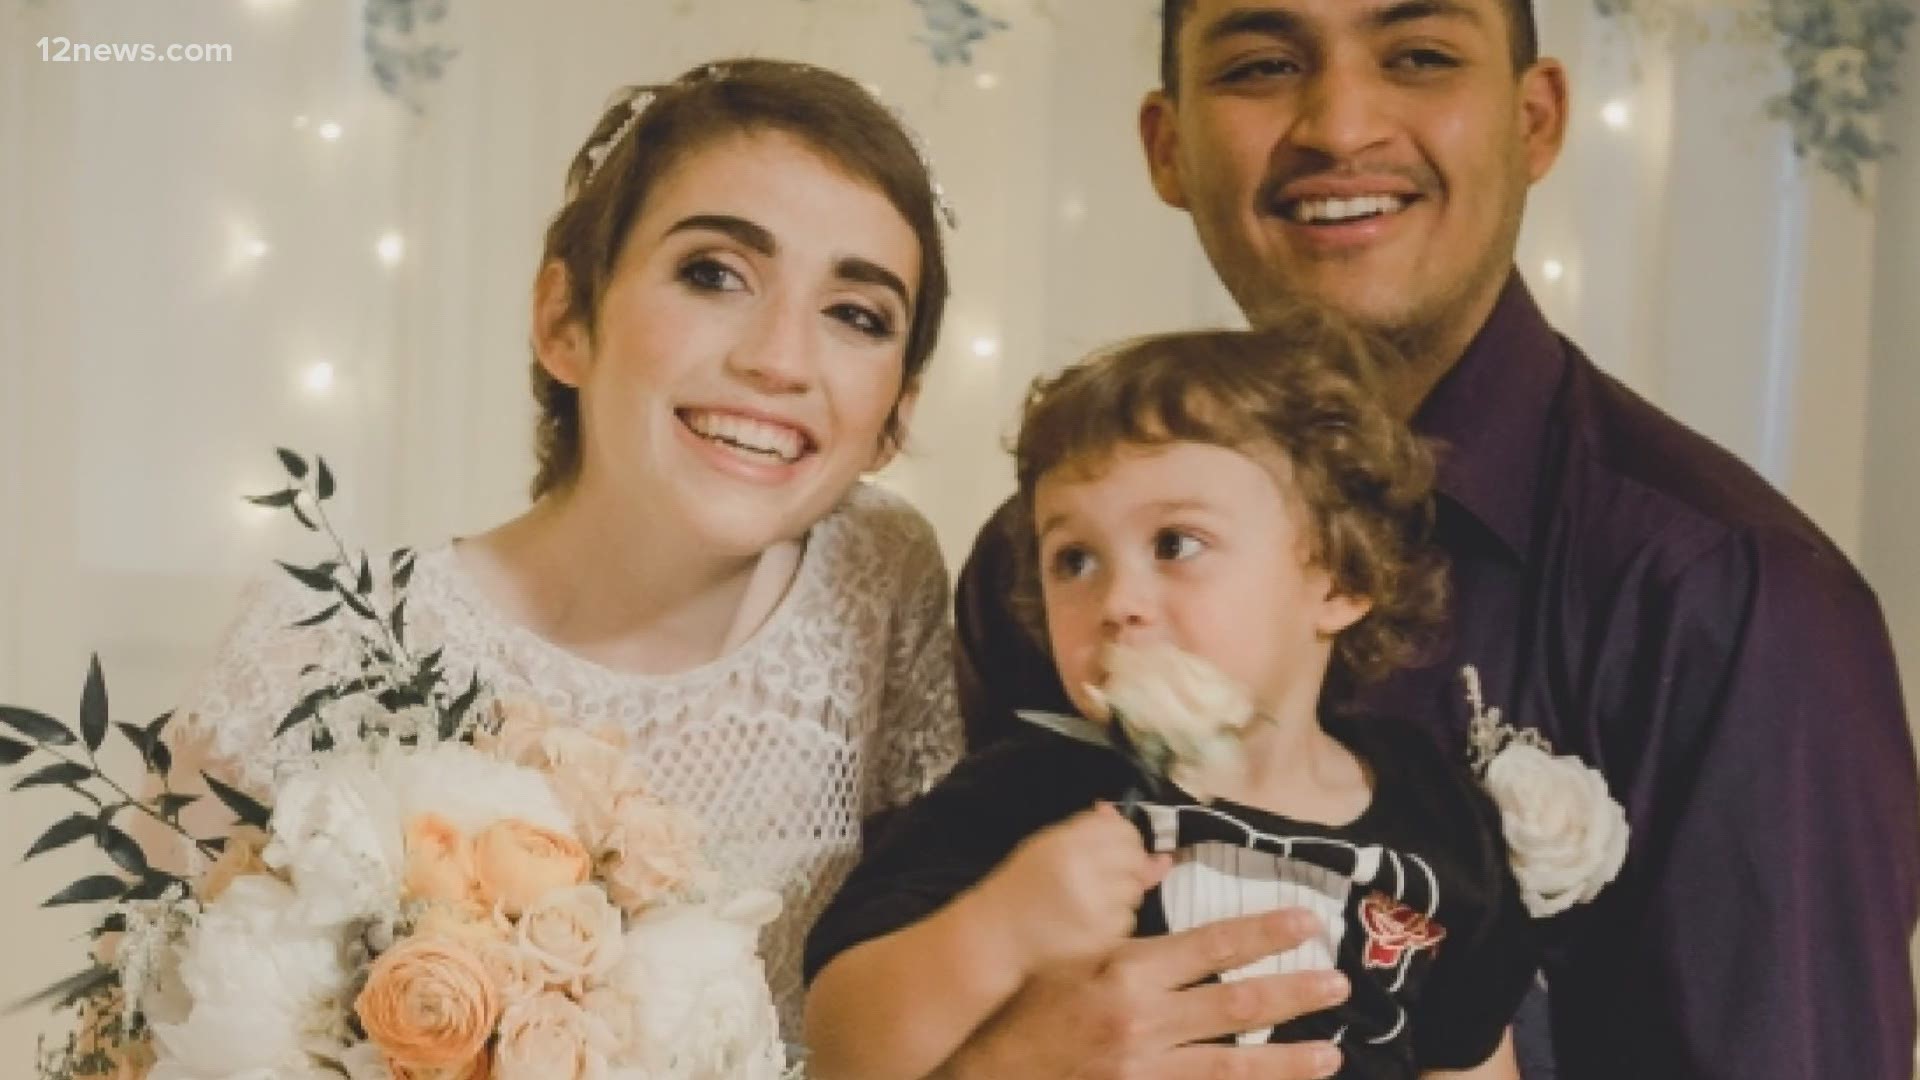 A Valley woman is in a fight for her life, but her positive spirit has kept her going. Those around her pulled off a dream wedding and it was all a surprise.